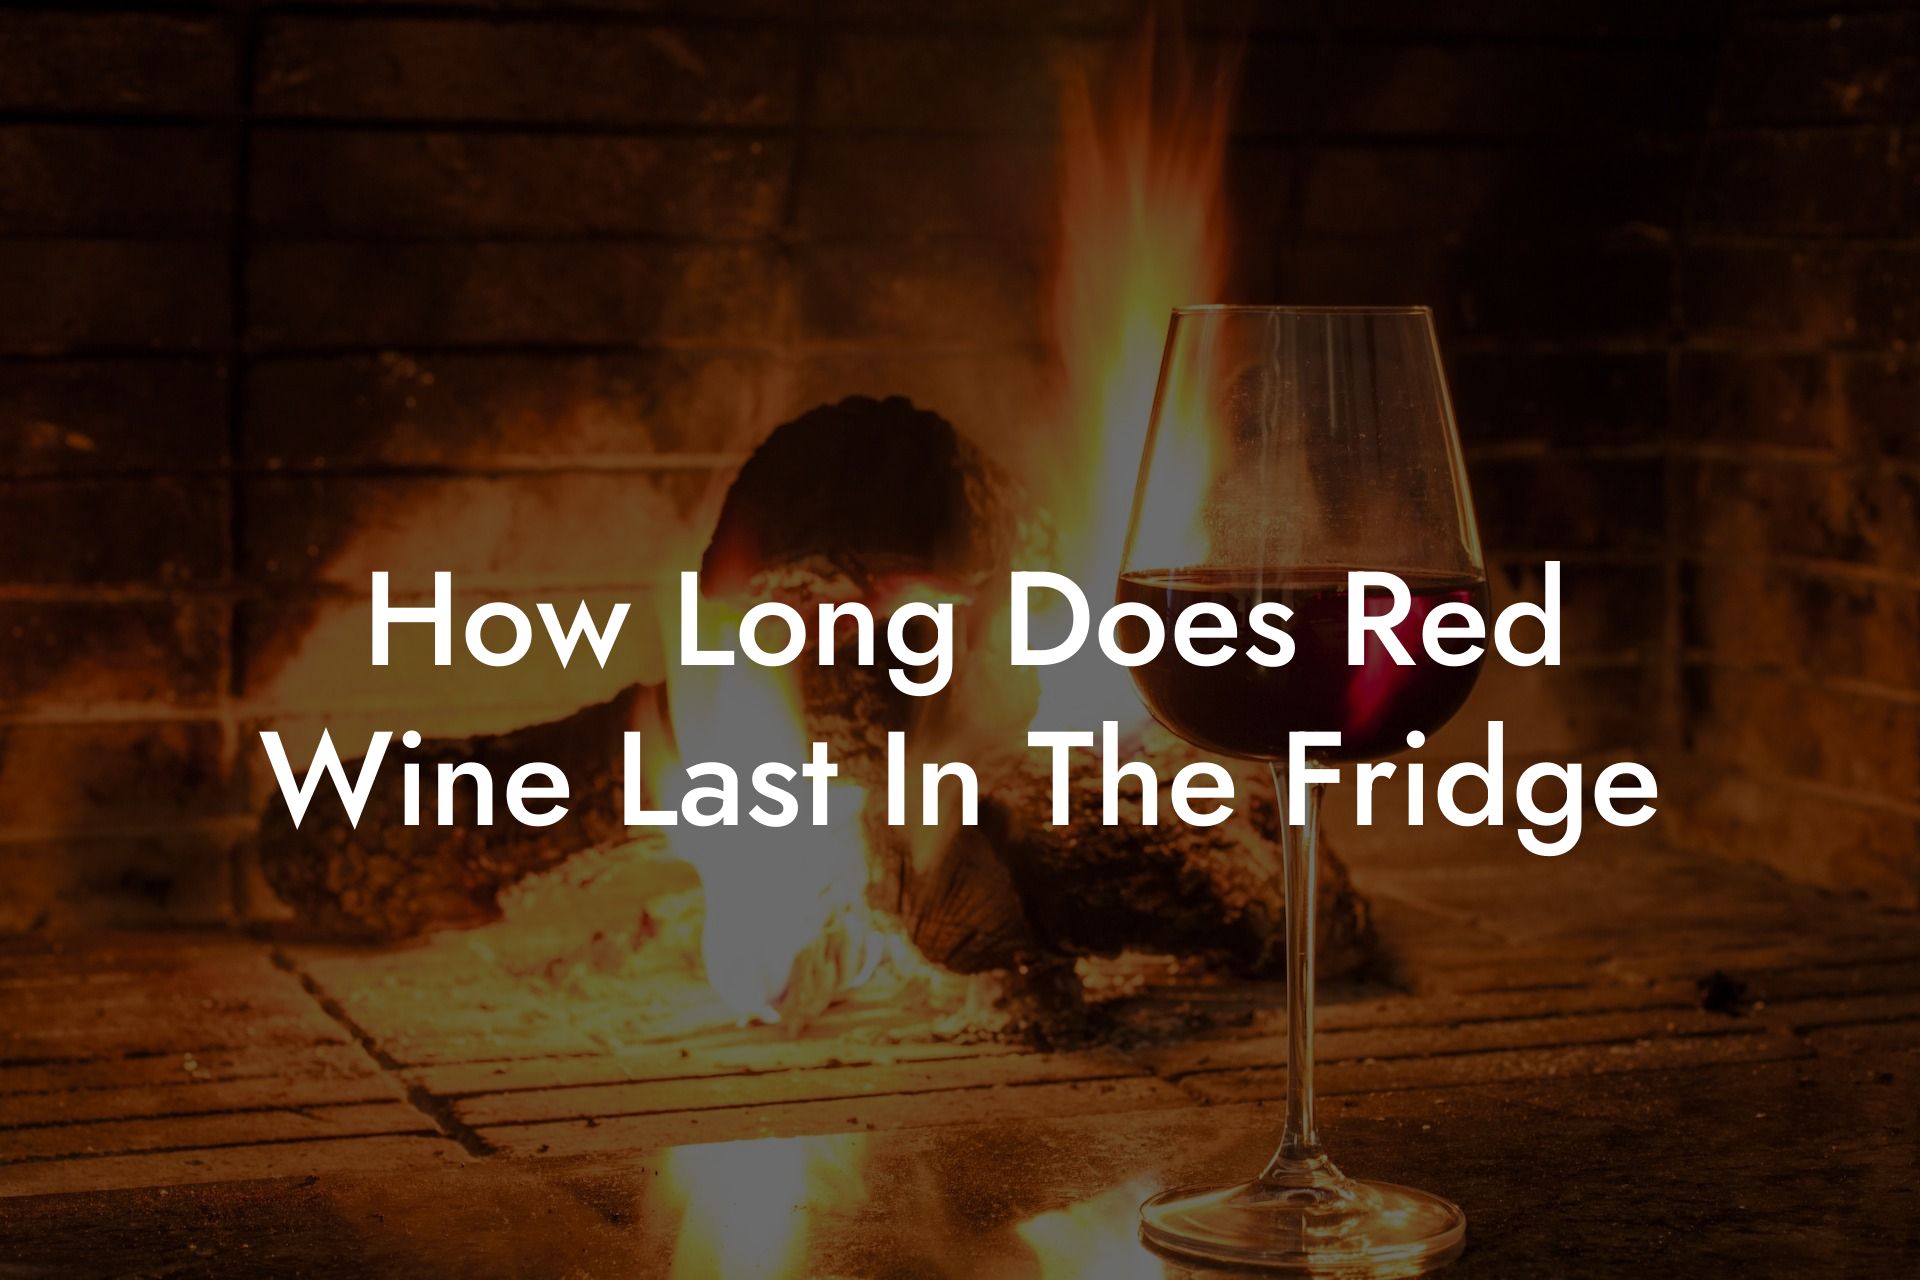 How Long Does Red Wine Last In The Fridge